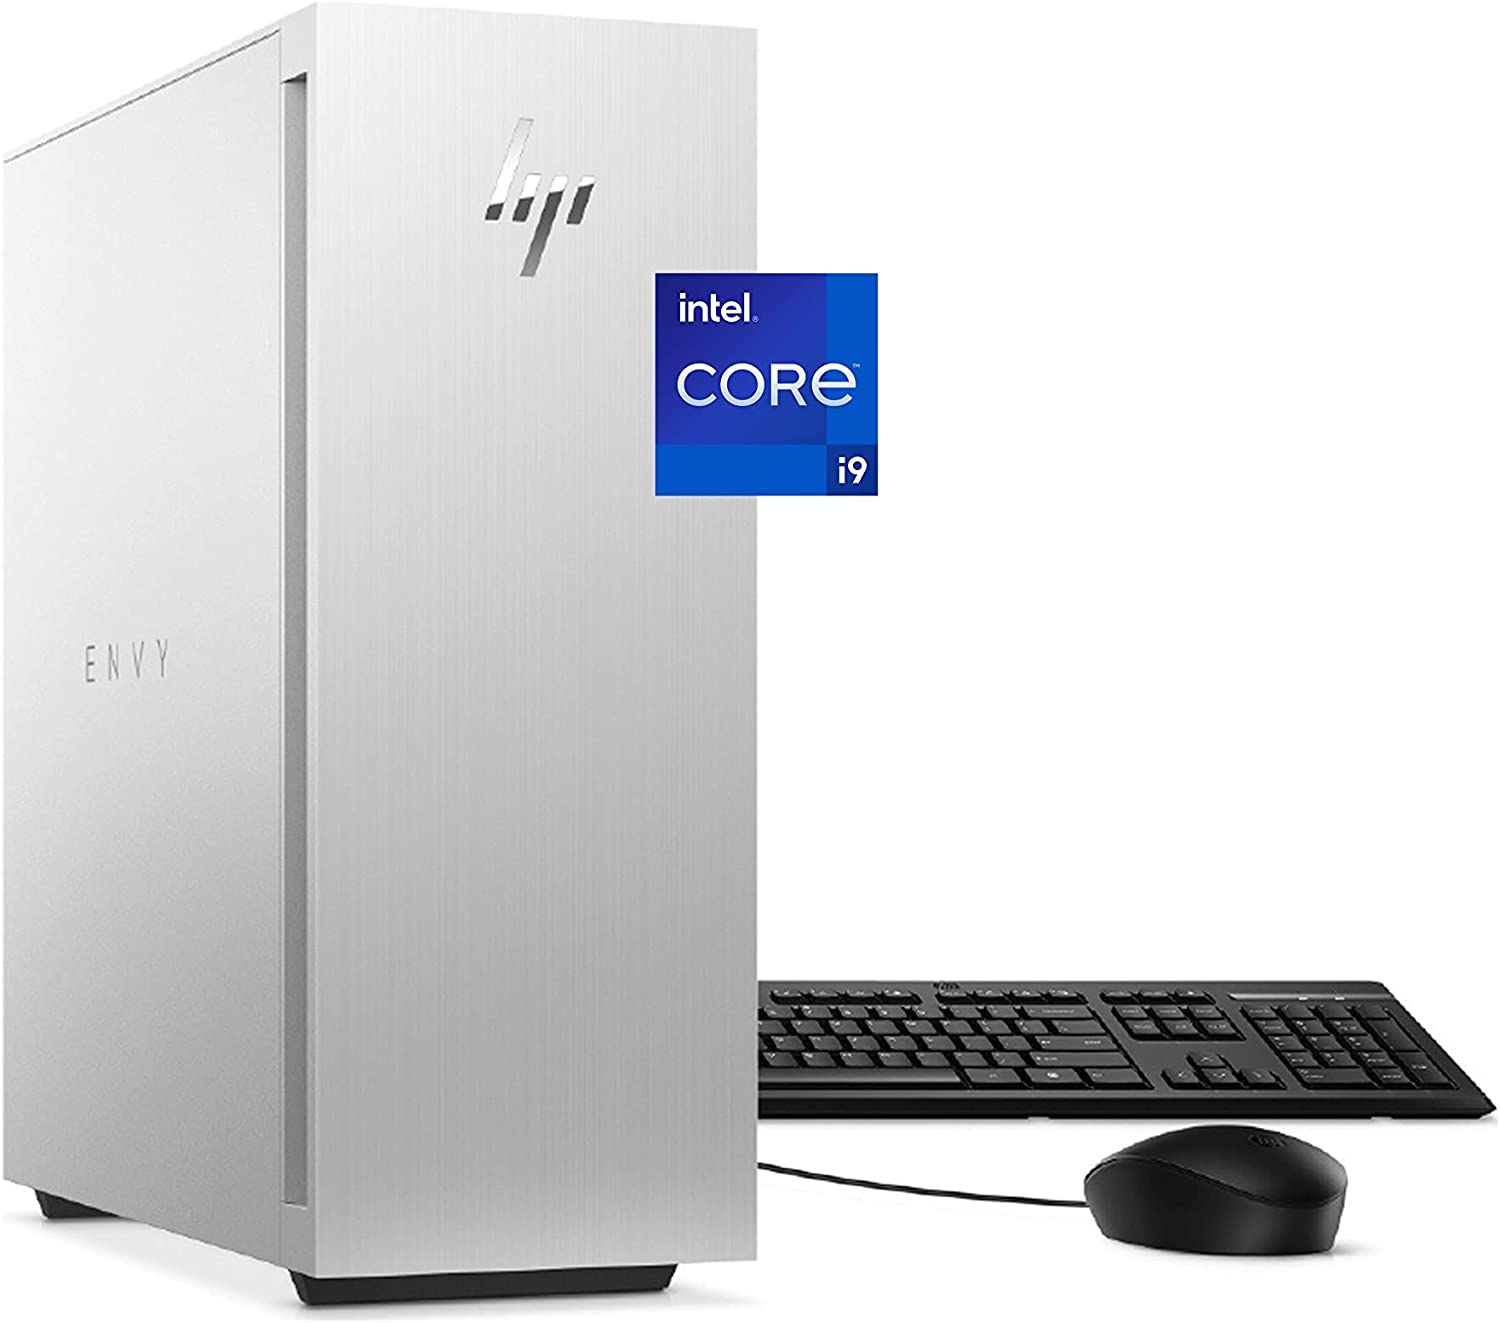 HP ENVY RTX 3070 Gaming PC Spotted on Amazon Selling at a 28% Discount